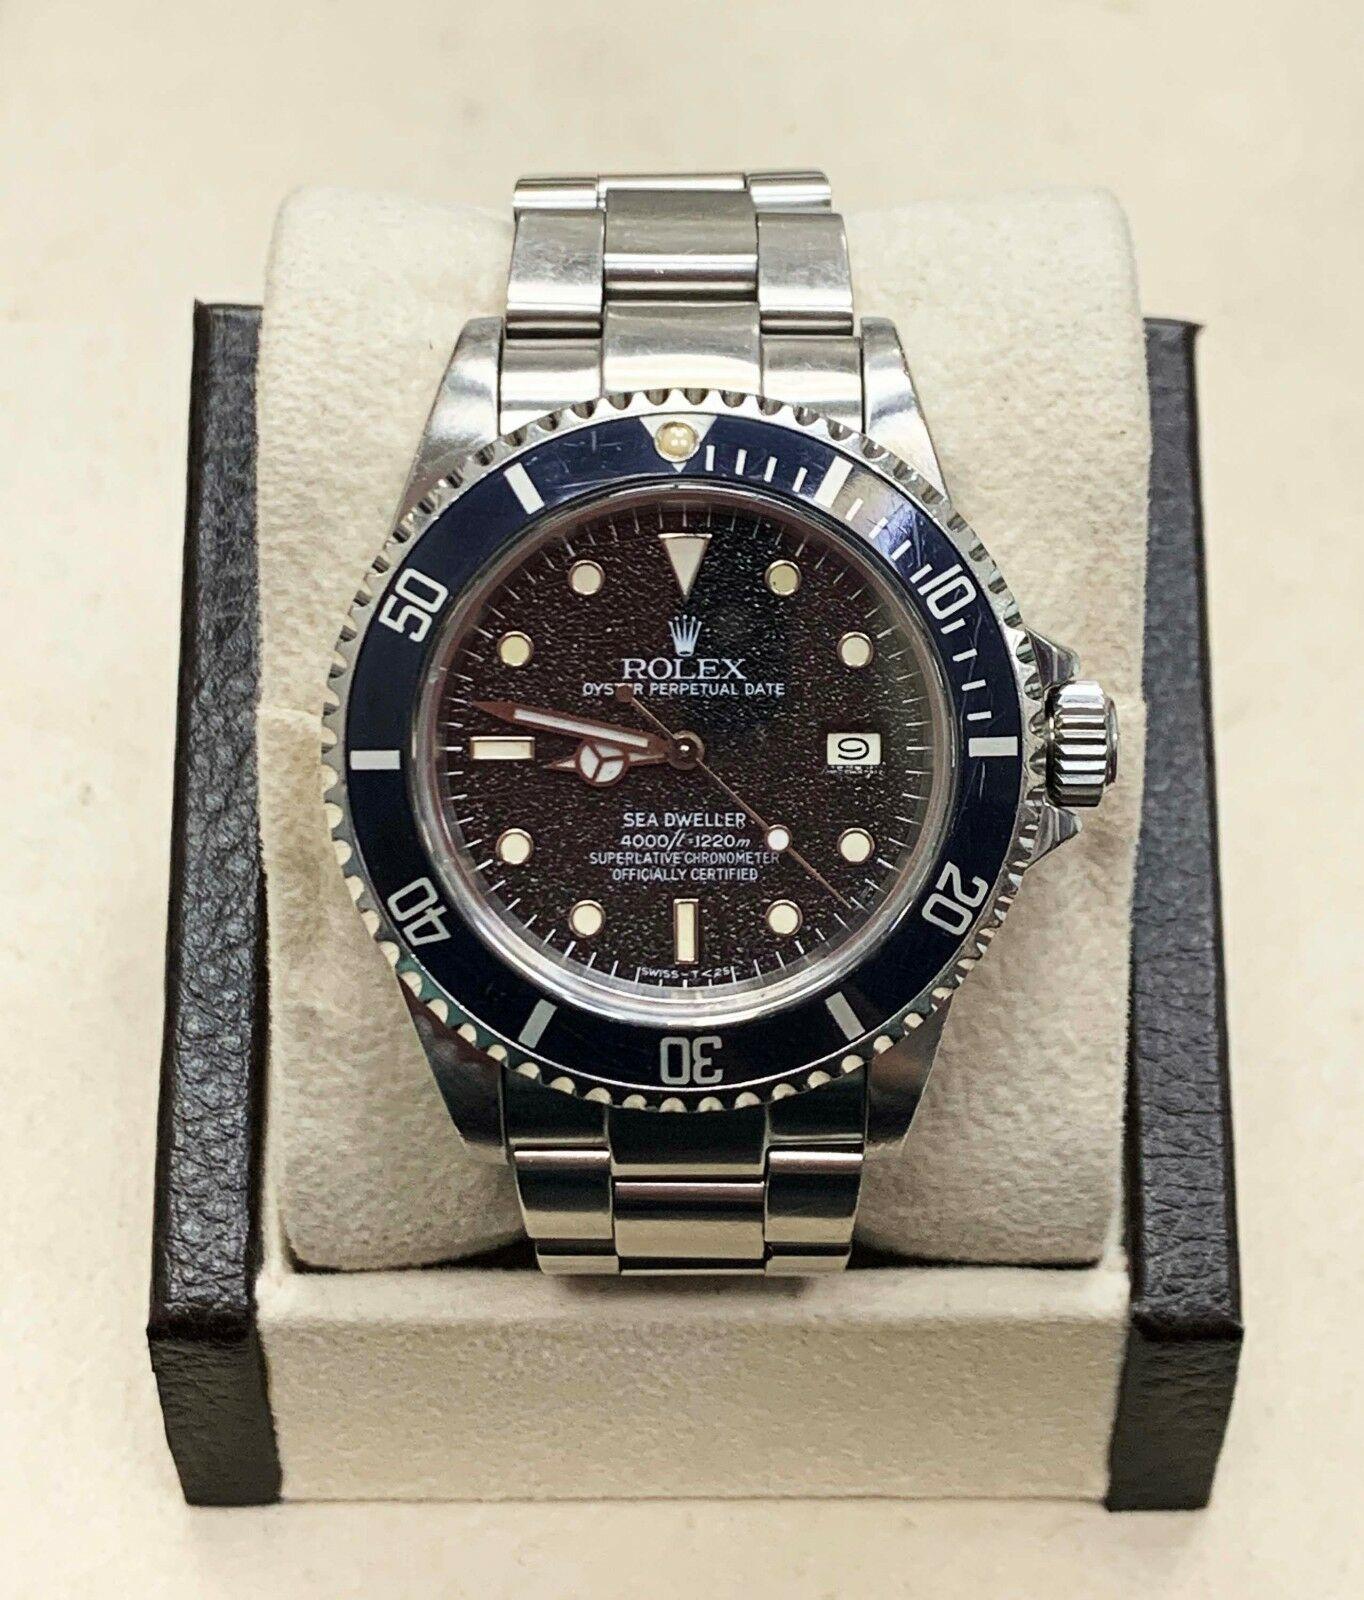 Style Number: 16660
Serial: 8057***
Year: 1984
Model: Sea- Dweller 
Case Material: Stainless Steel 
Band: Stainless Steel 
Bezel: Black
Dial: Black- Very Rare Stardust MK3 Dial 
Face: Sapphire Crystal 
Case Size: 40mm

Includes: 
-Elegant Watch